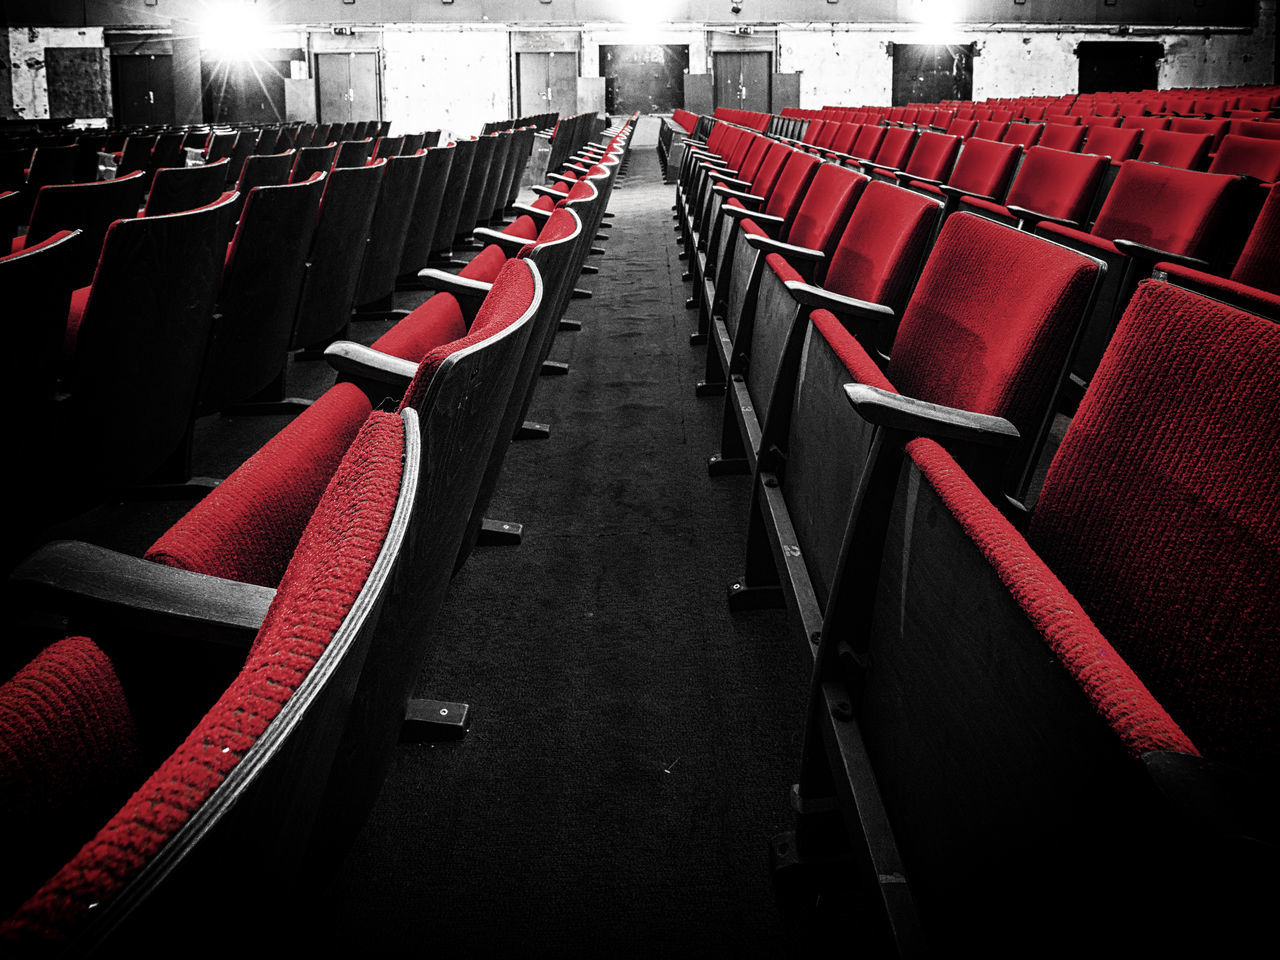 in a row, seat, empty, red, chair, movie theater, absence, no people, repetition, arts culture and entertainment, large group of objects, arrangement, indoors, side by side, order, architecture, auditorium, day, theater, film industry, aisle